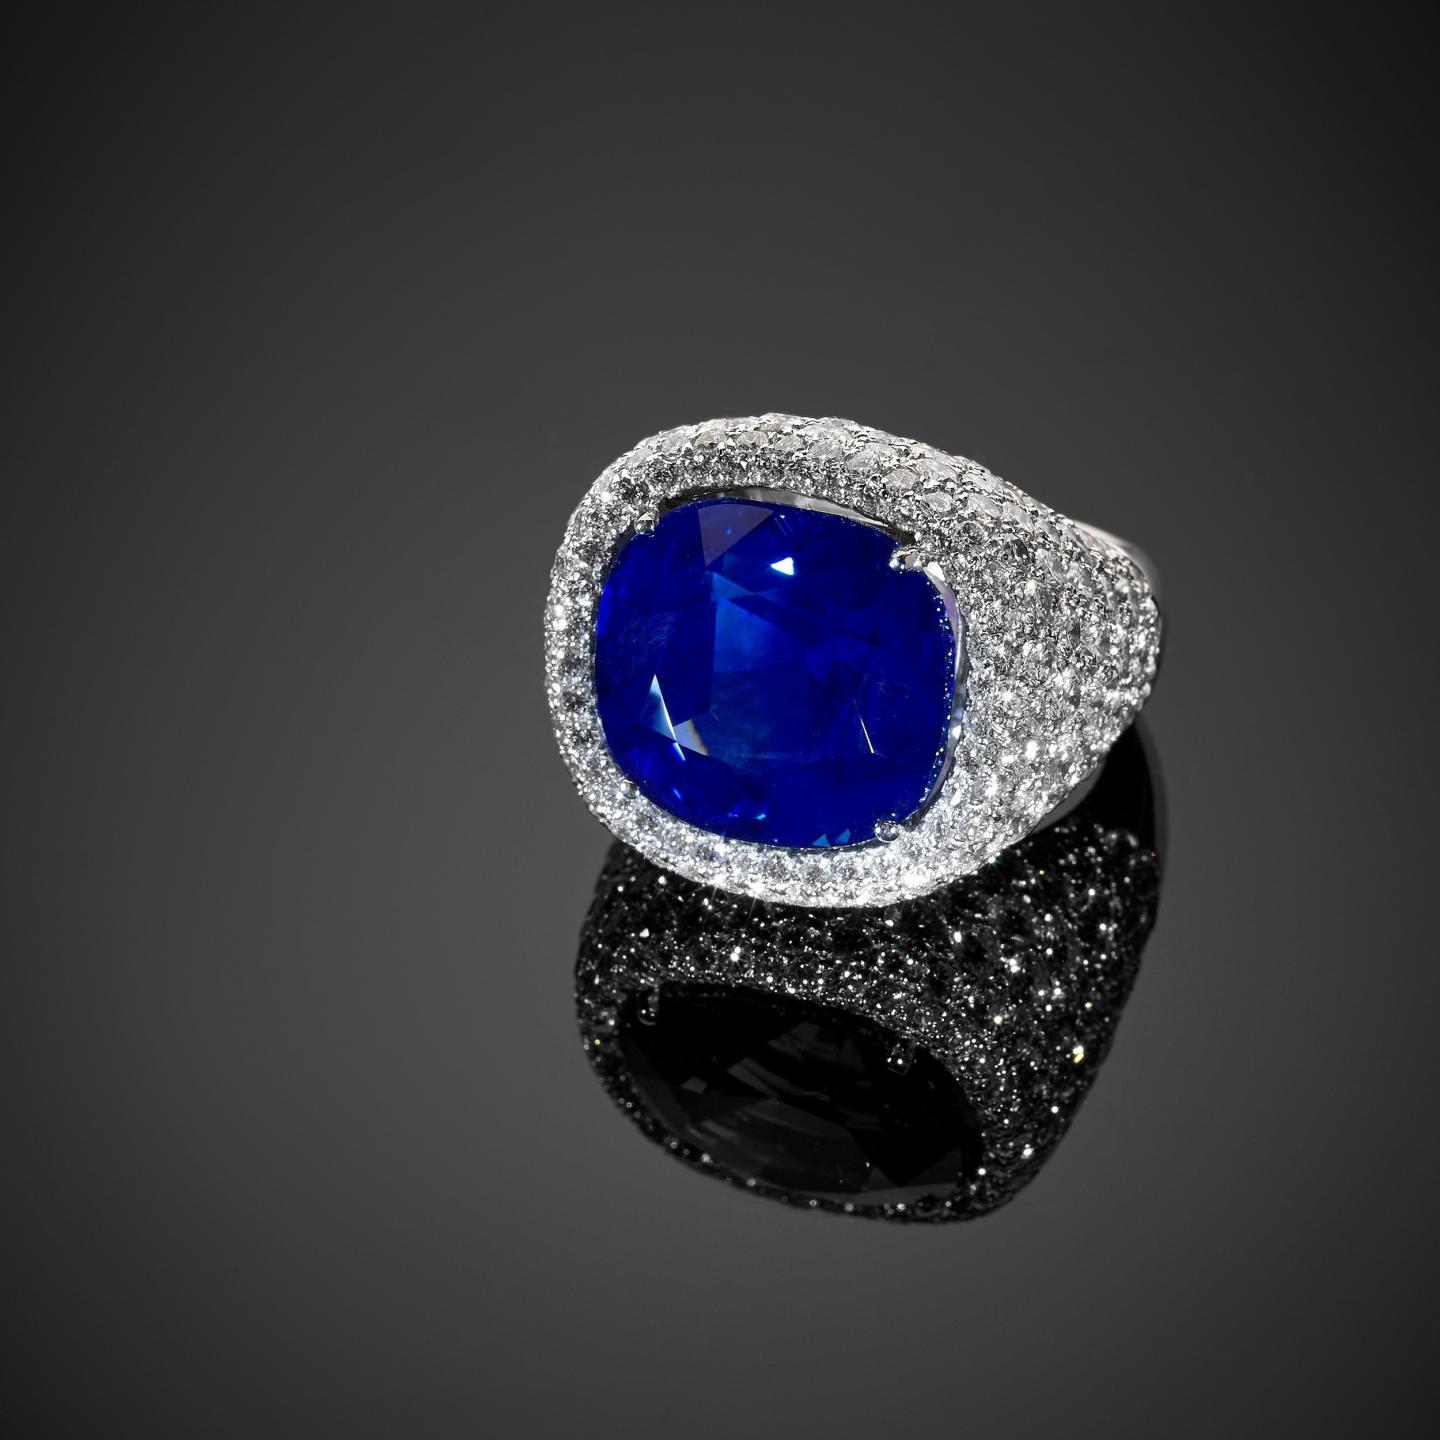 A Kashmir Sapphire and diamond ring weighing 12.43 carats (est  $1,200,000-1,800,000) as part of the Magnificent Jewels and Noble Jewels at  the Sotheby's Press Preview for the Royal Jewels from the Bourbon